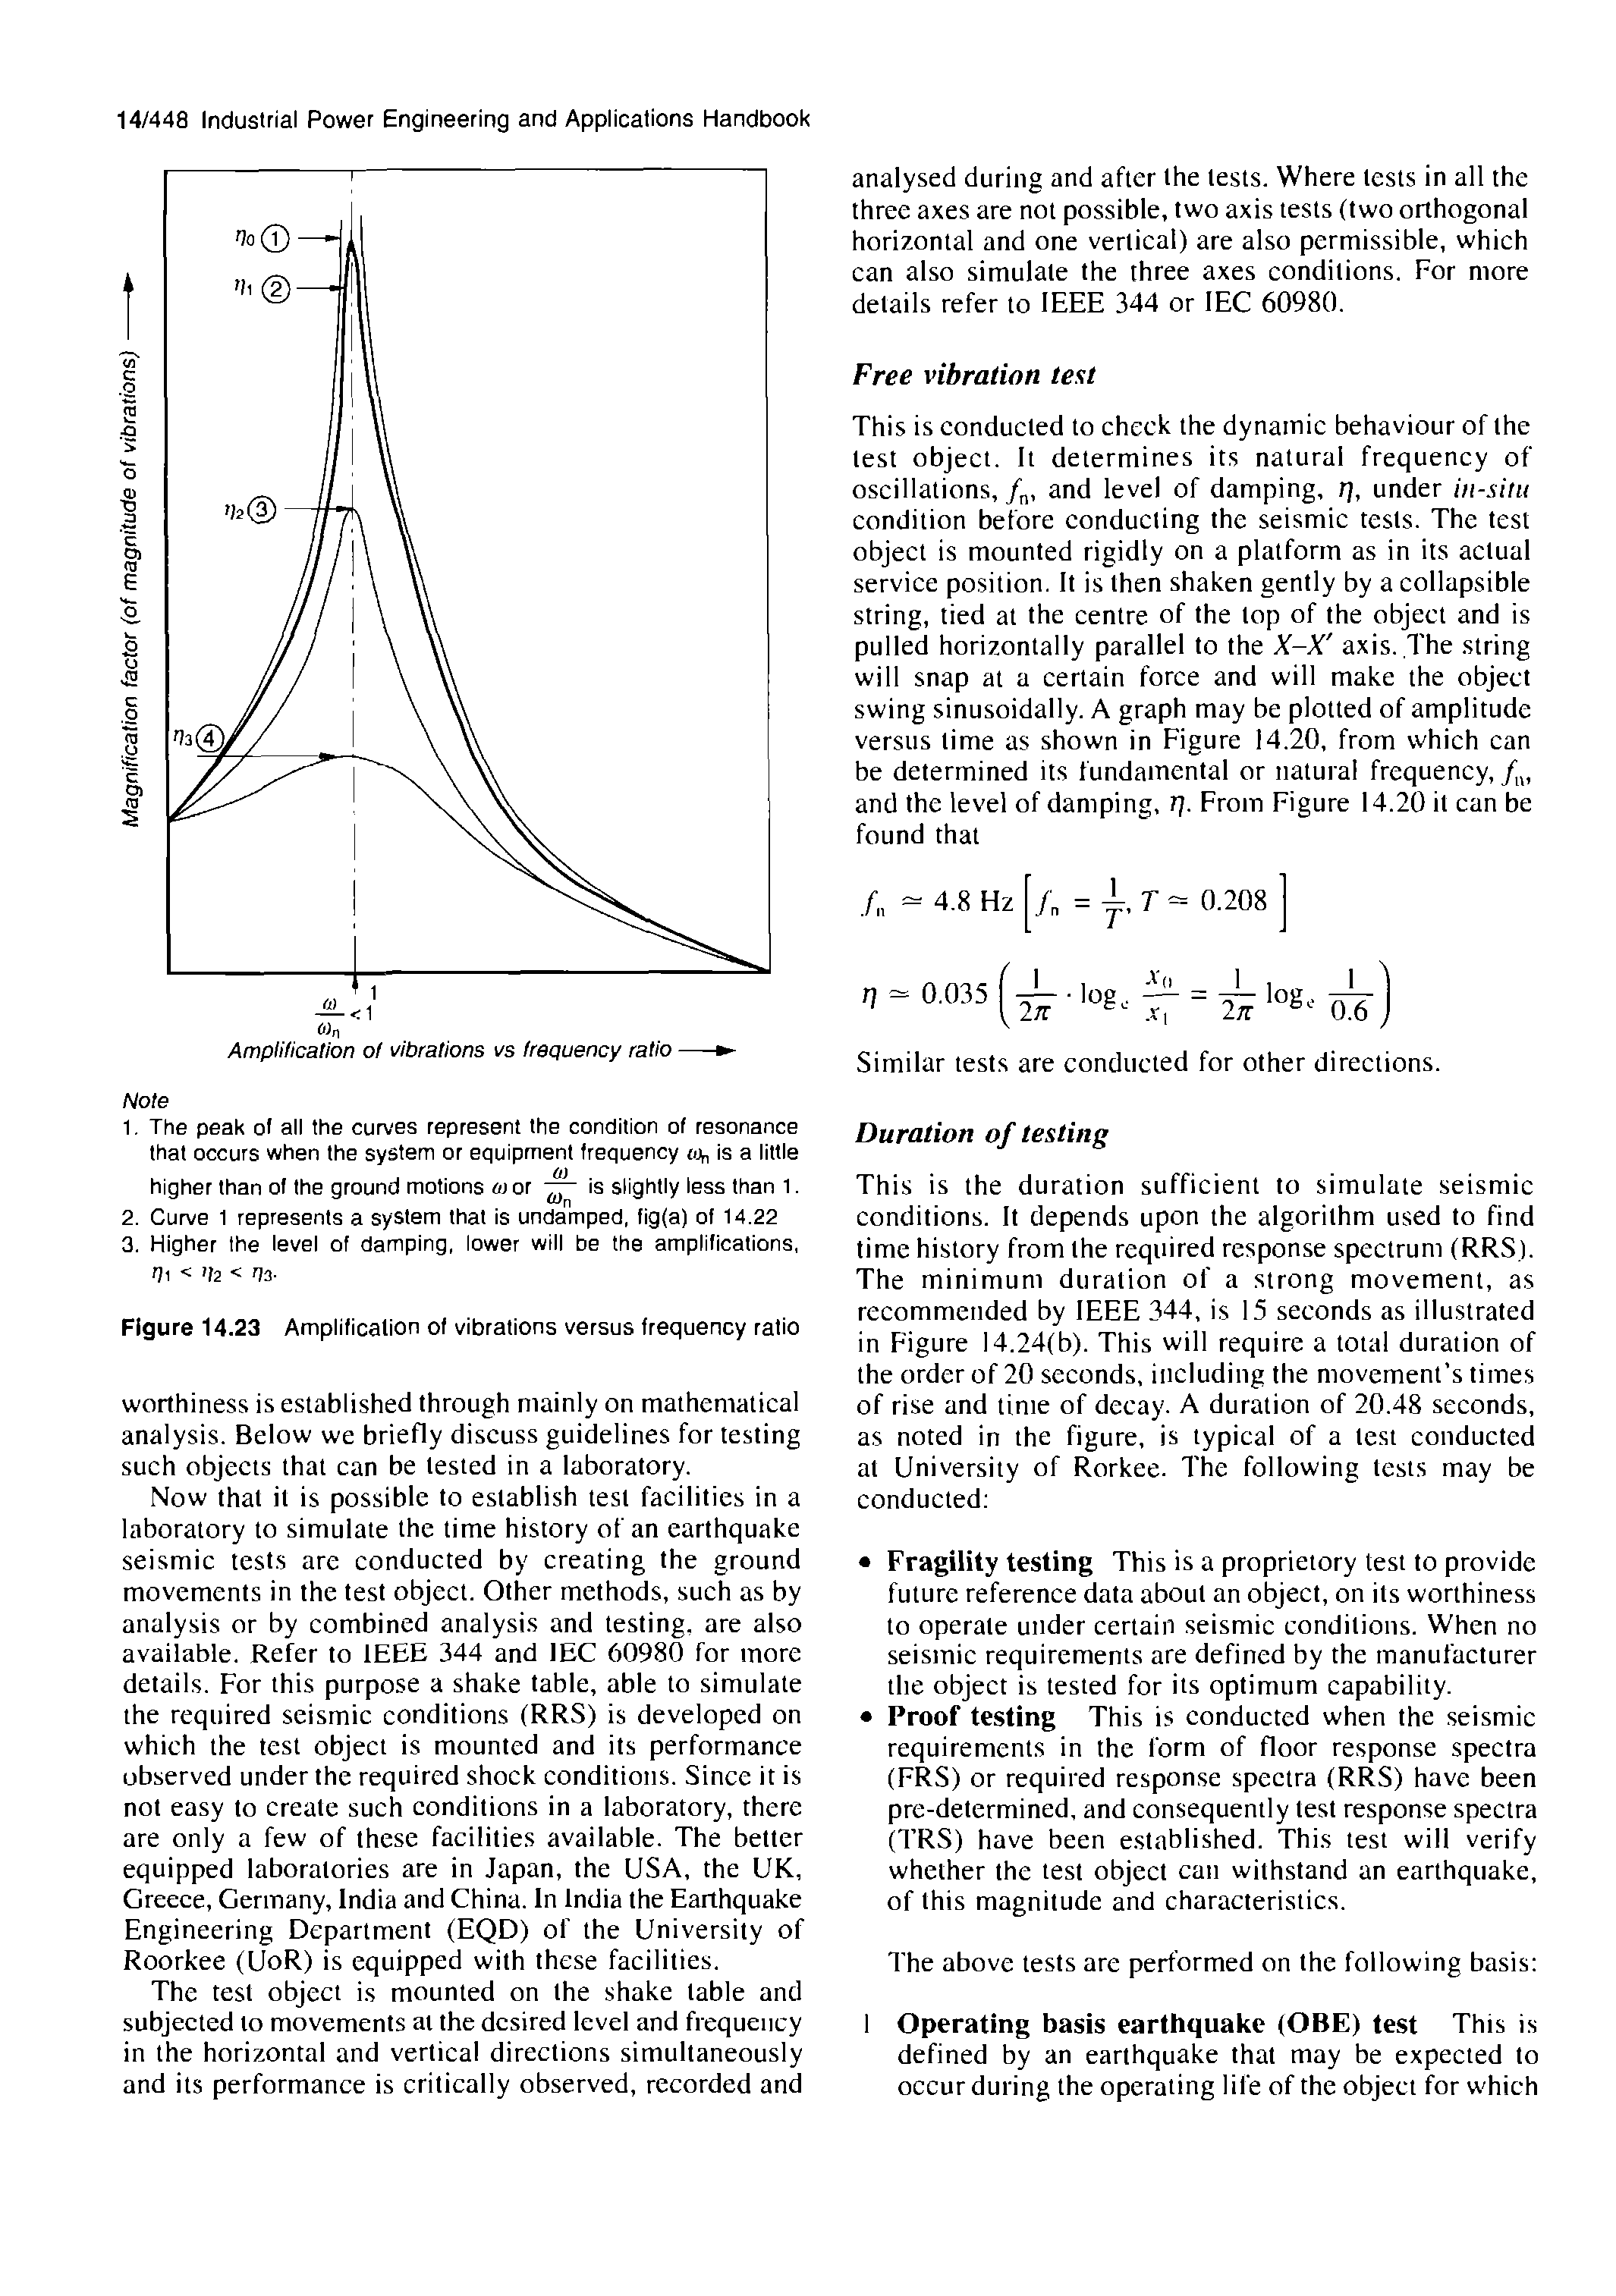 Figure 14.23 Amplification of vibrations versus frequency ratio...